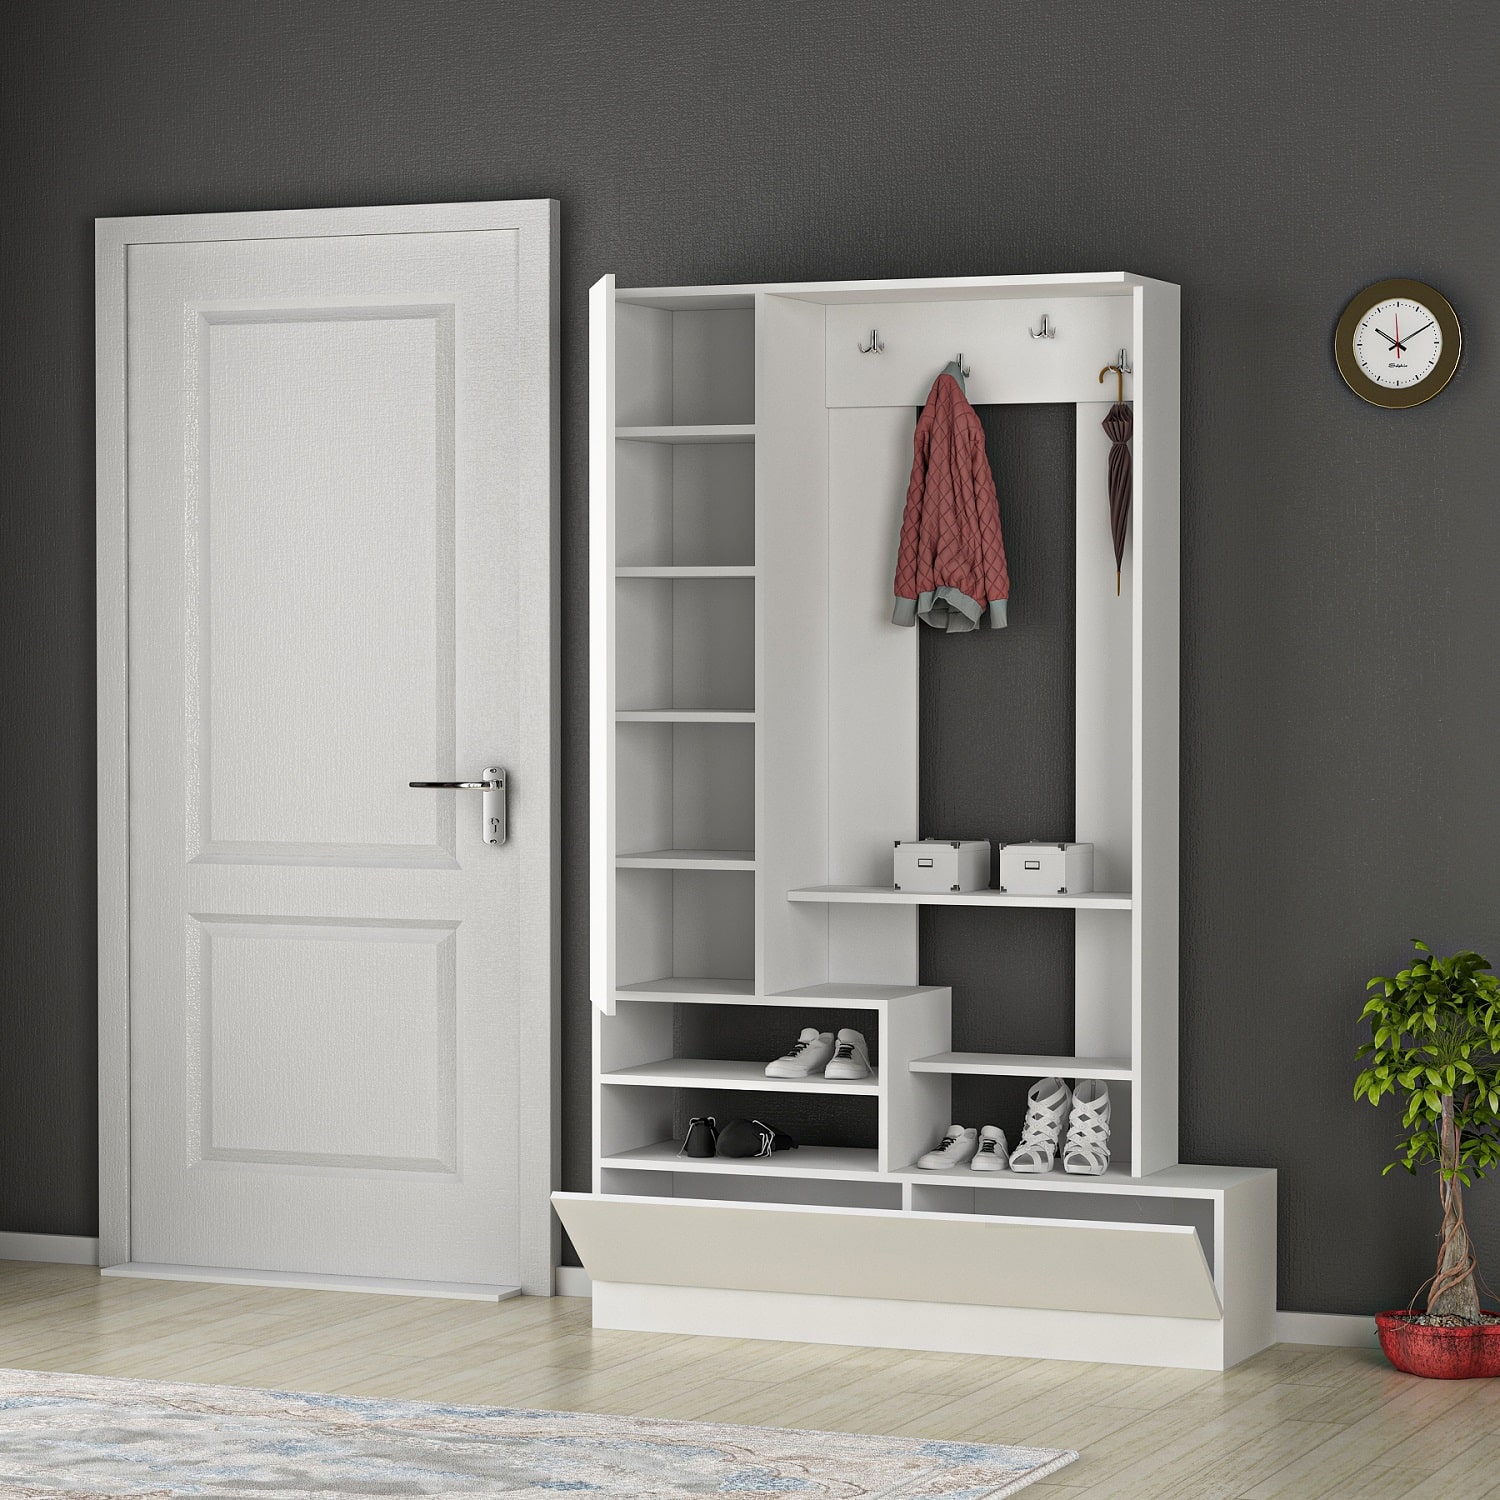 Furniture - Coat Rack Garden White Furniture Netsan and - Shelves Entryway Cabinets with Seta & Home - Manufacturer